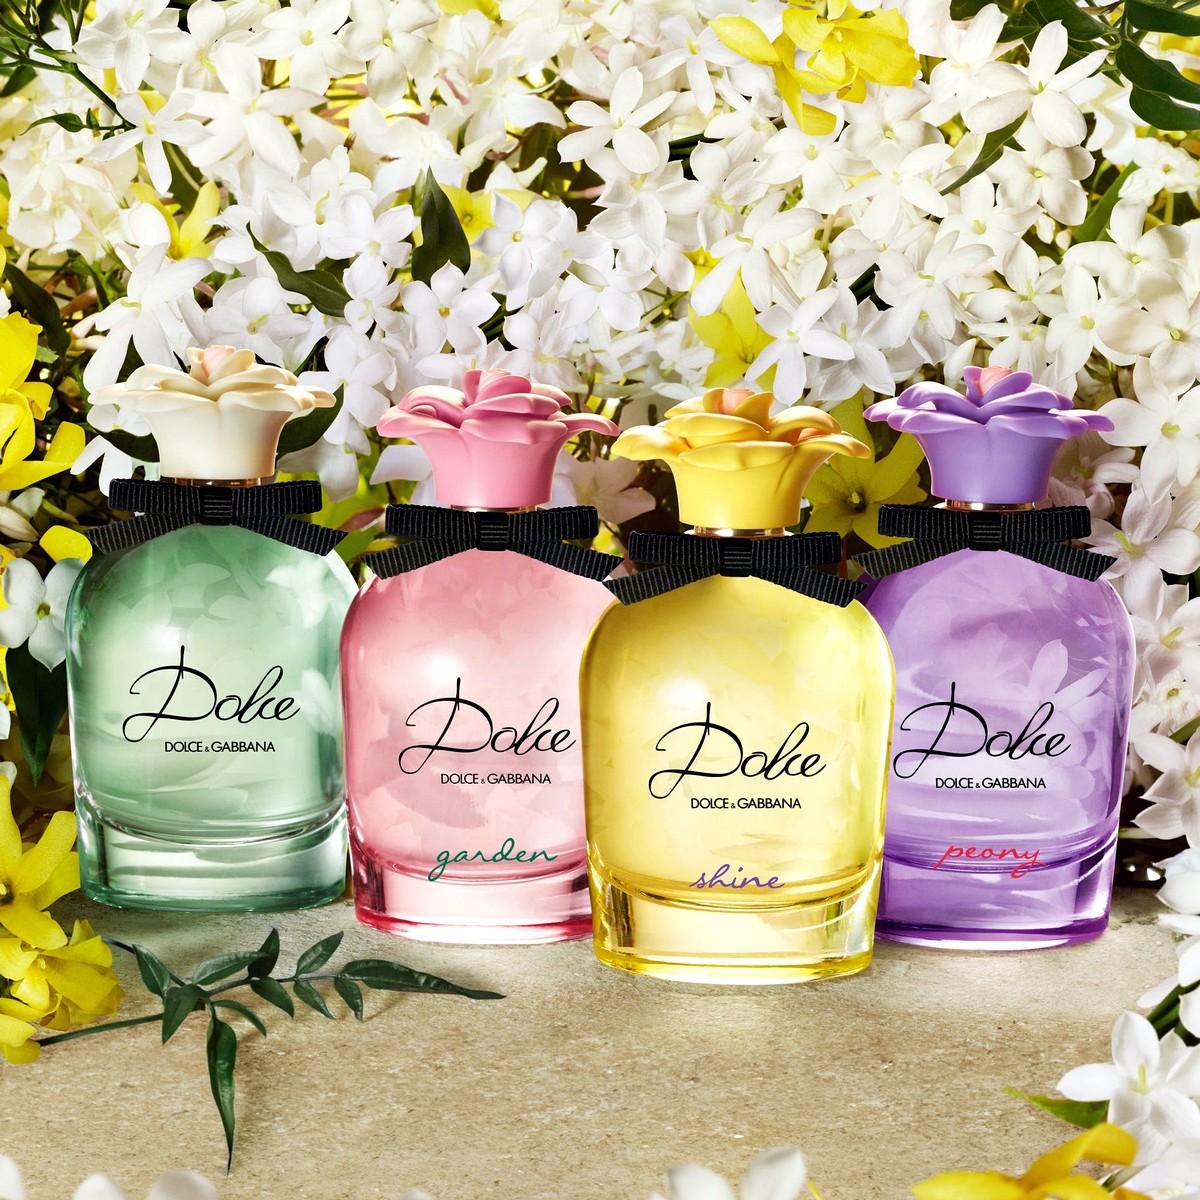 DOLCE_RANGE_2020_1-00 - Beauty & Health Cosmetics Fragrances Hair Care Pahang Personal Care Skincare Warehouse Sale & Clearance in Malaysia 